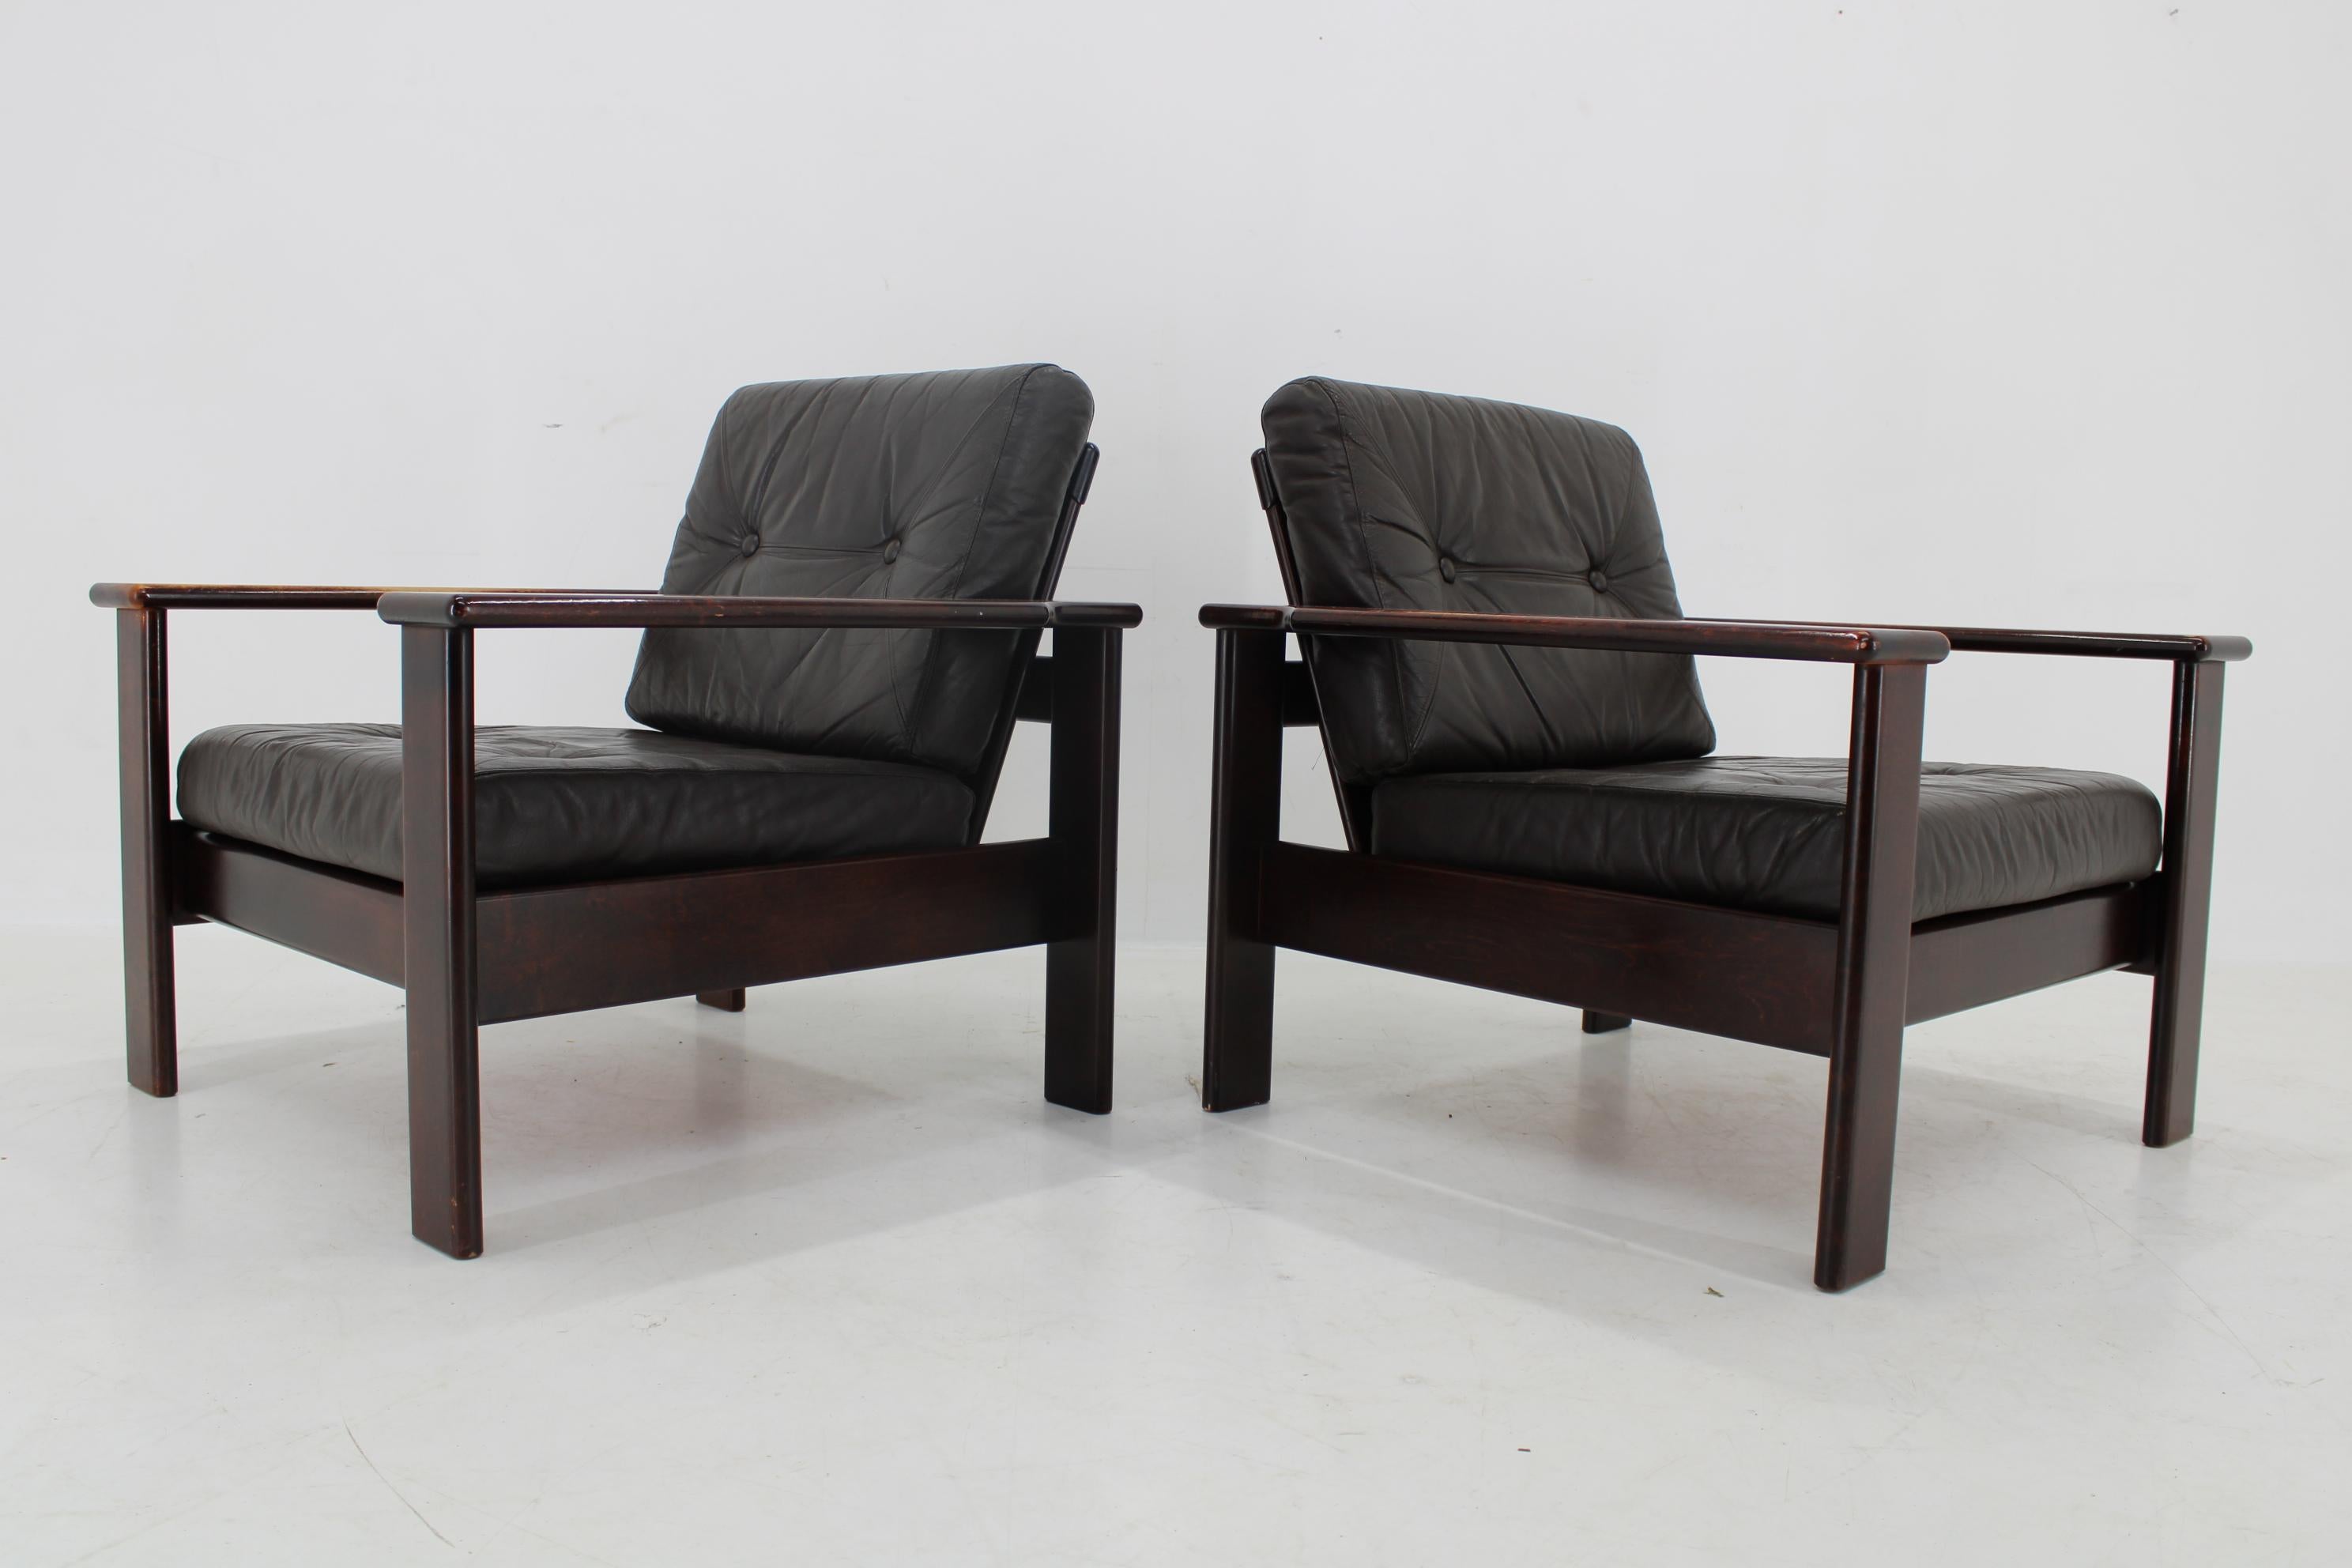 1970s Pair of Leather Armchairs by Lepofinn, Finland For Sale 7